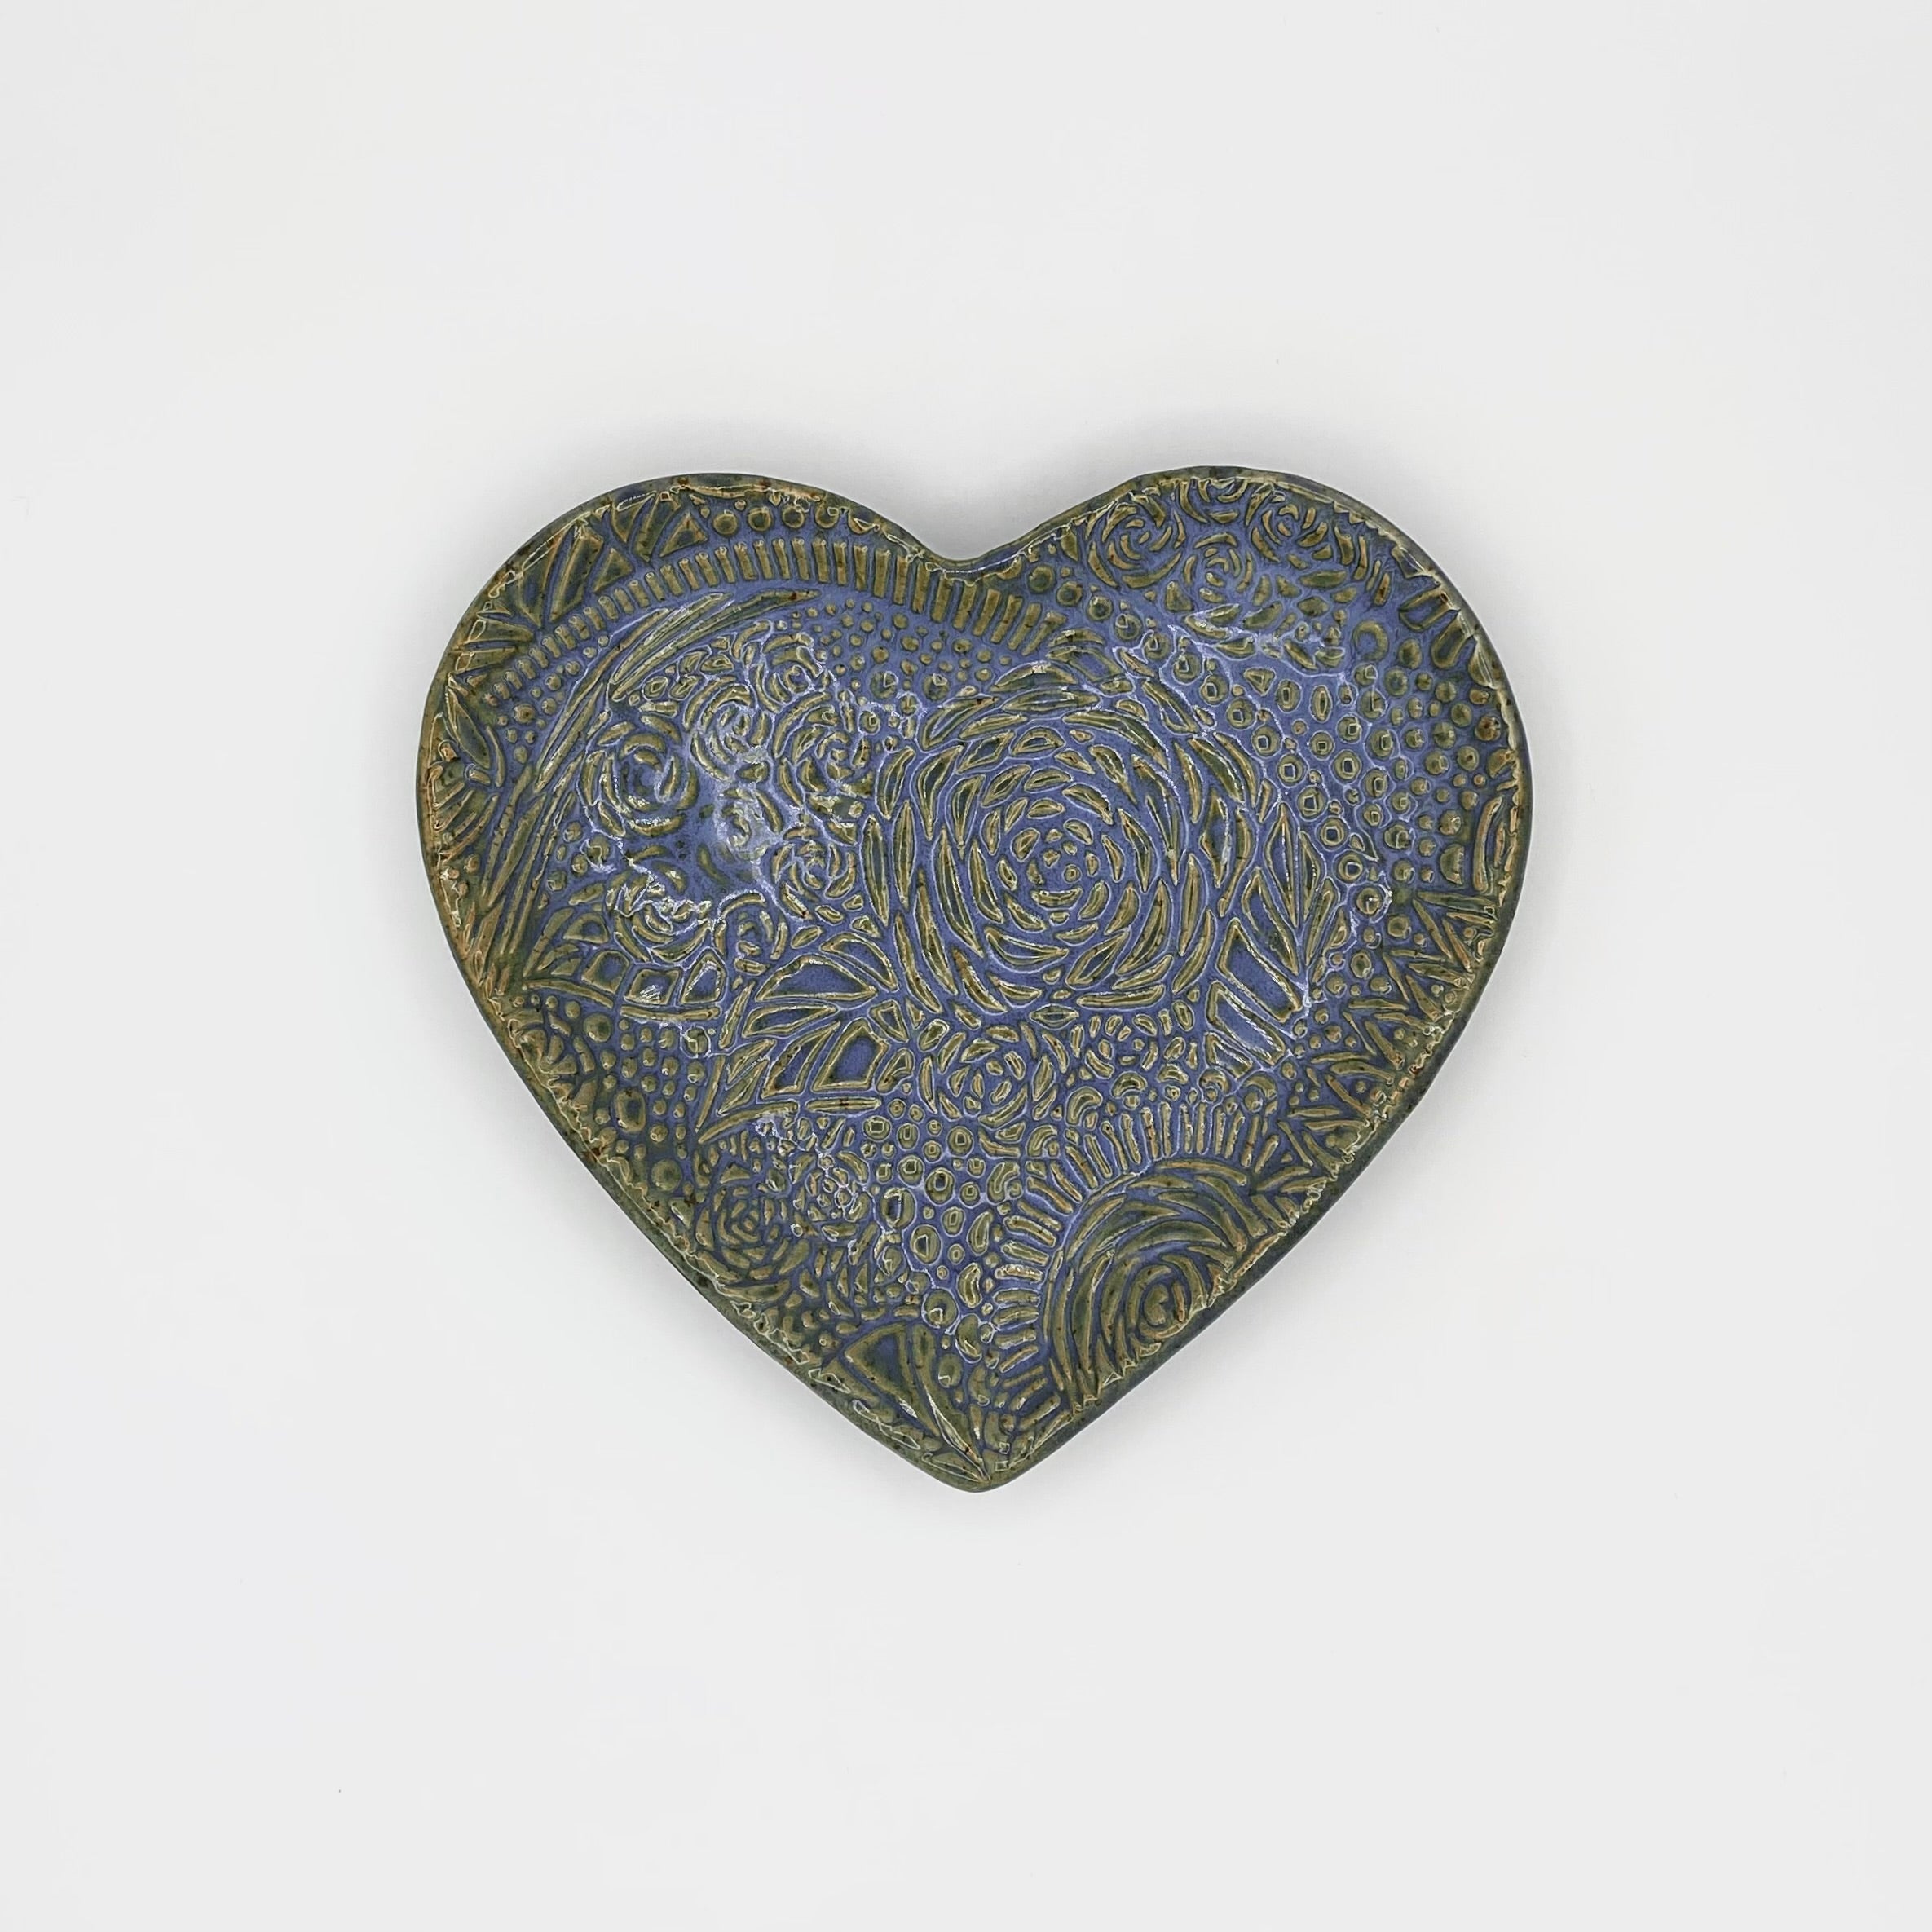 Heart Plate by Antithesis Designs